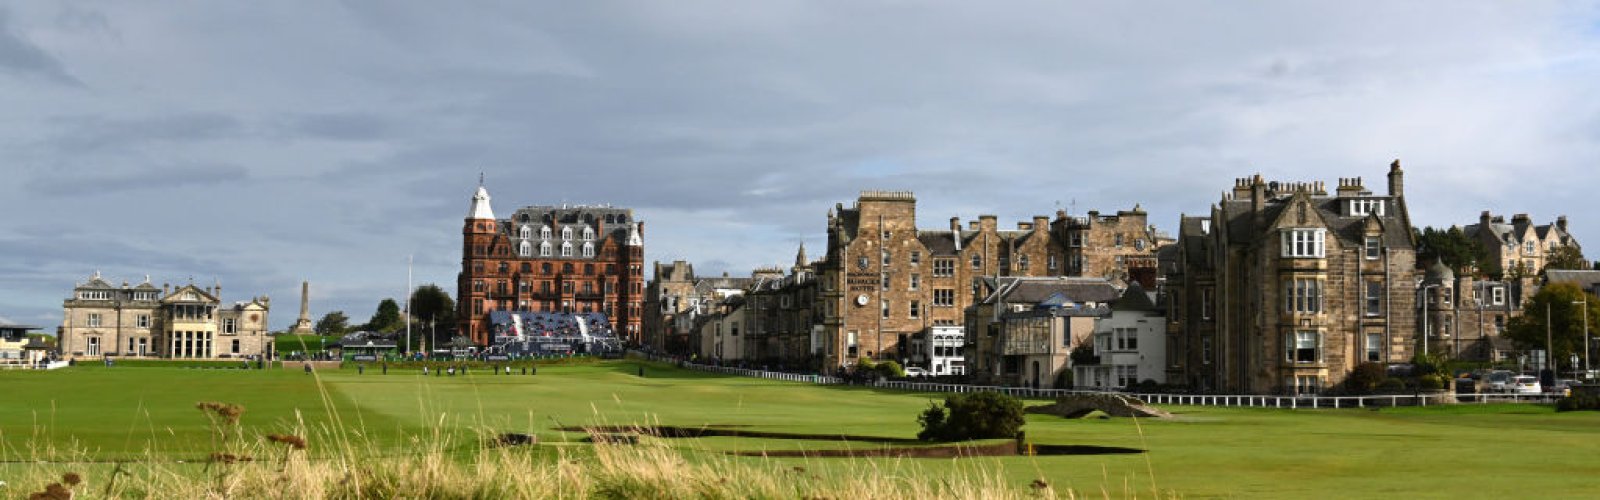 St Andrews Old Course - The oldest and most iconic golf course in the world.